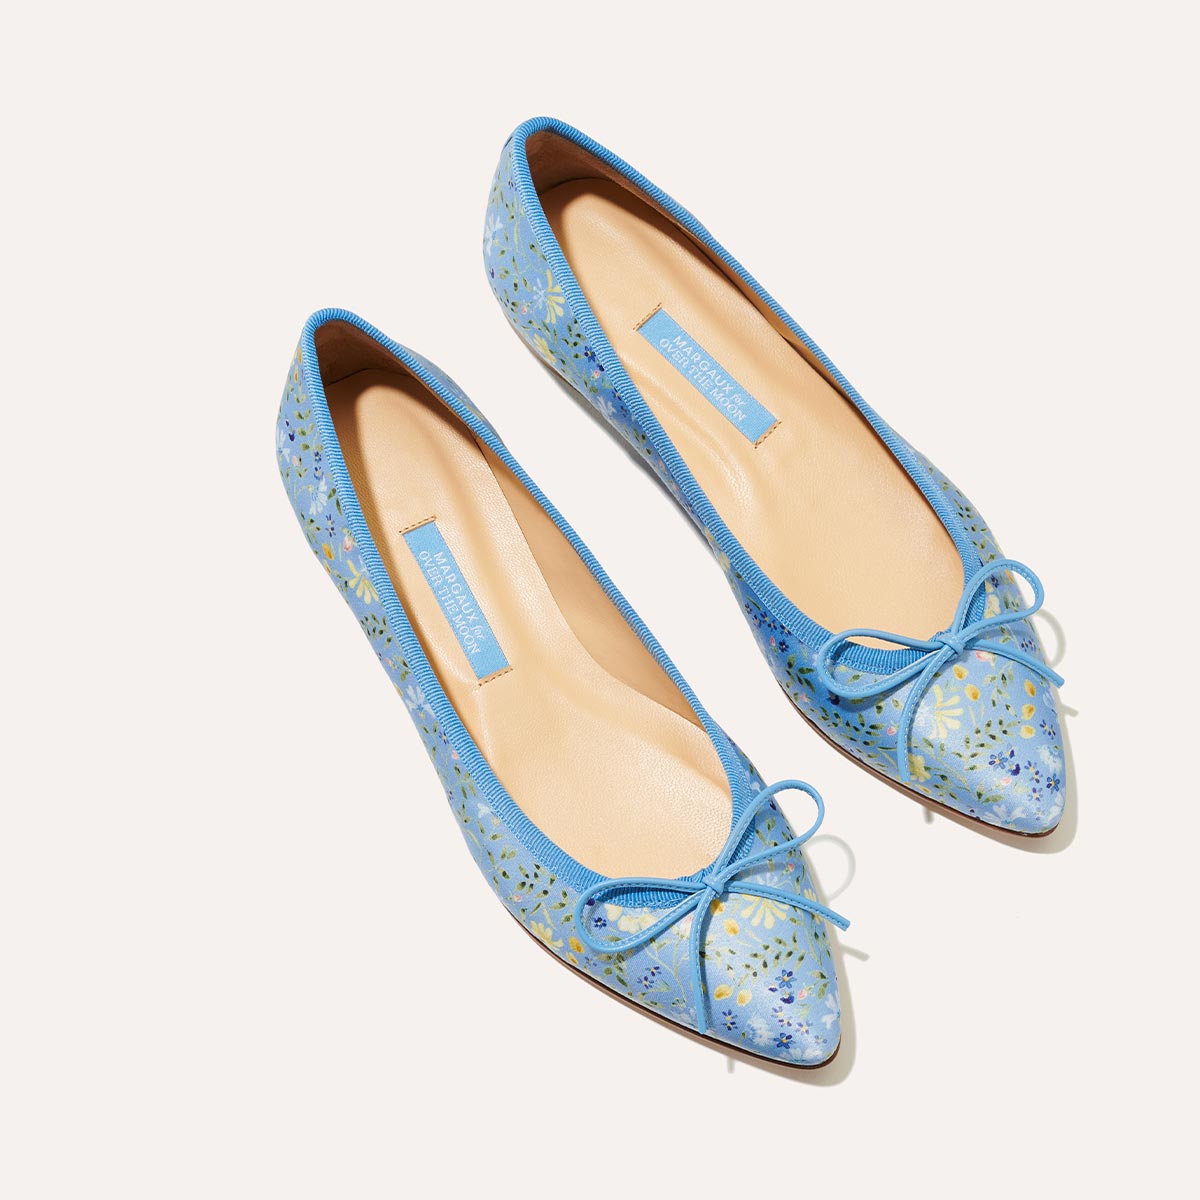 The Pointe - Blue Floral Satin